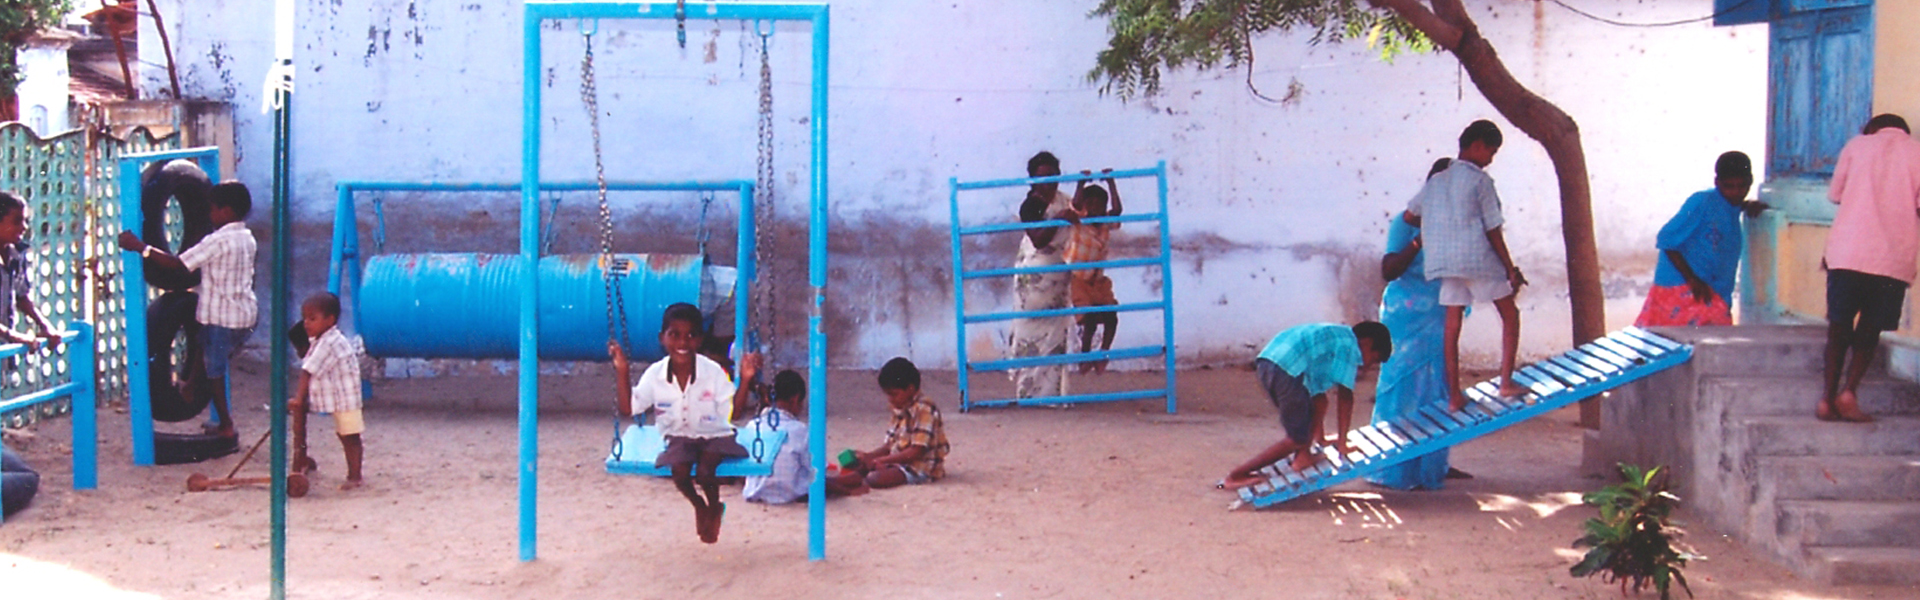 Outdoor play forms part of play therapy for Children at the rural Residential Centre, Musiri